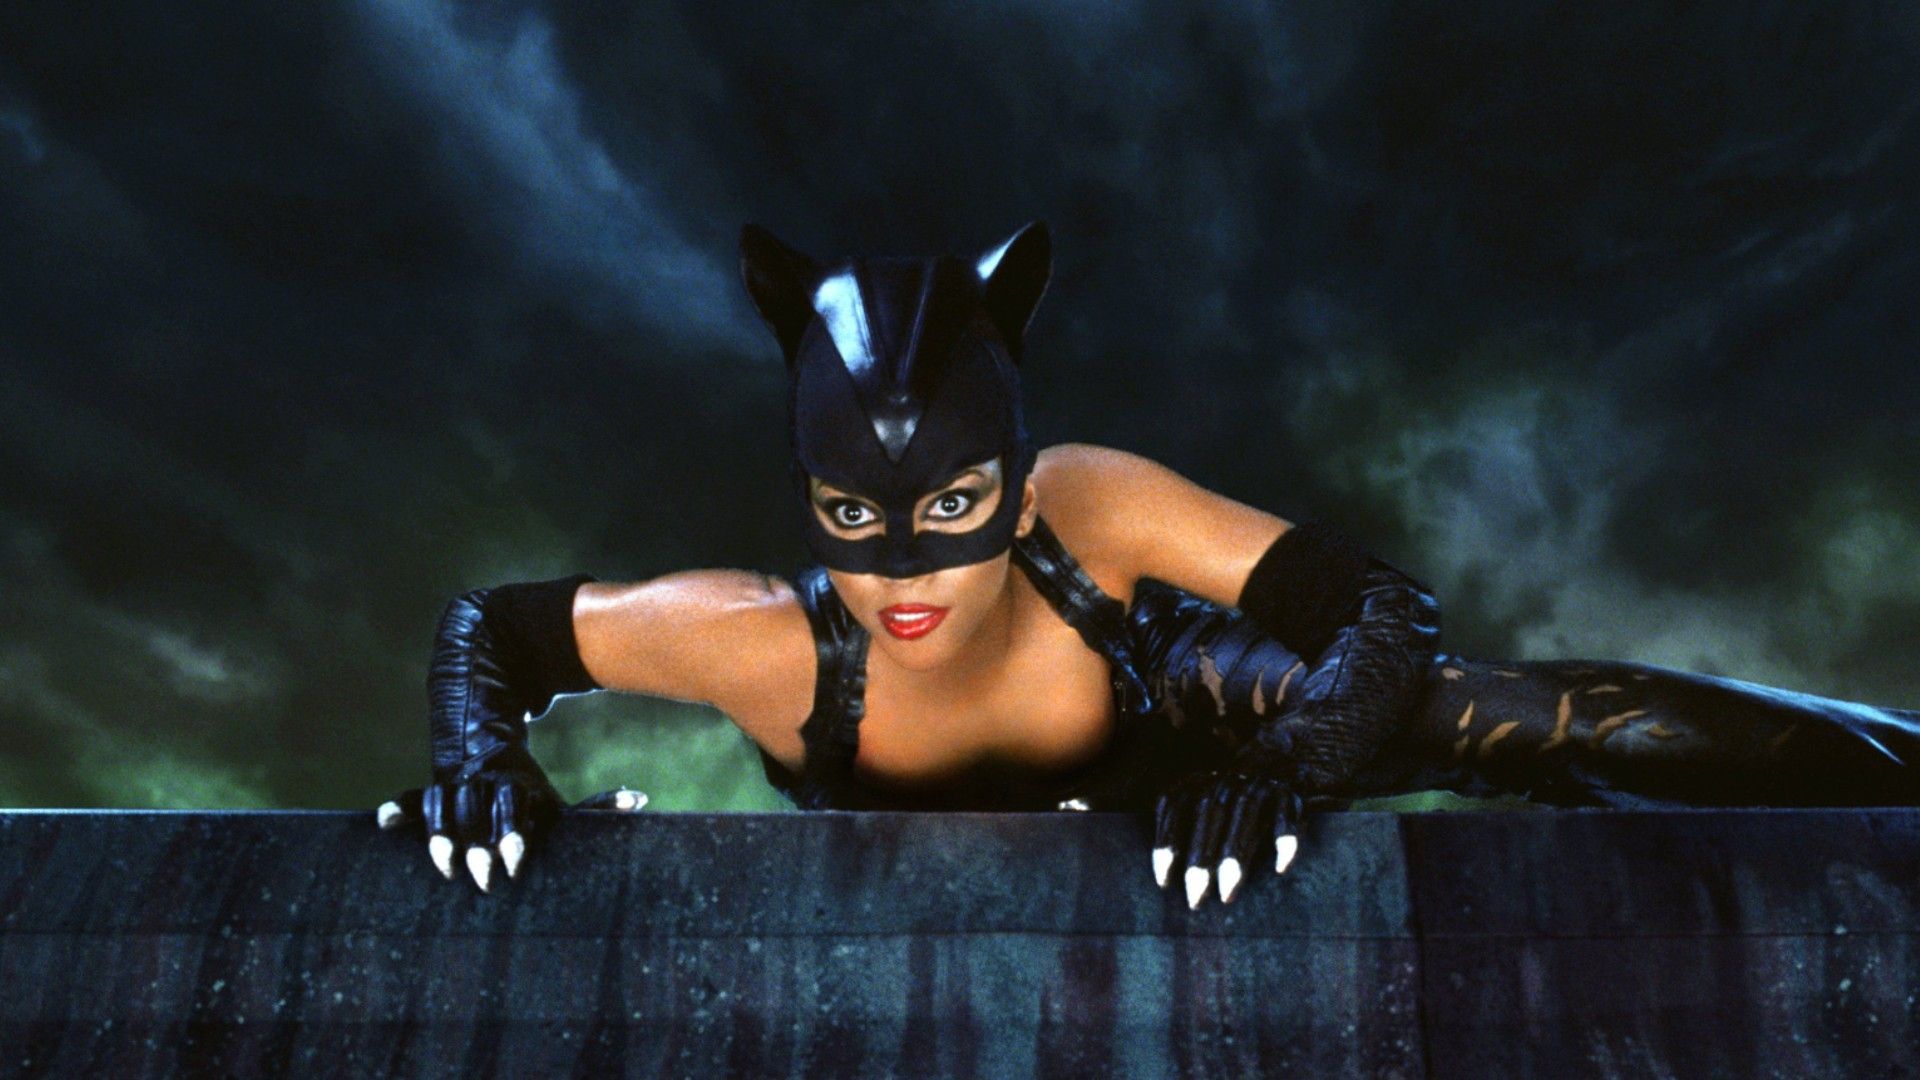 Halle Berry's Catwoman ready to pounce